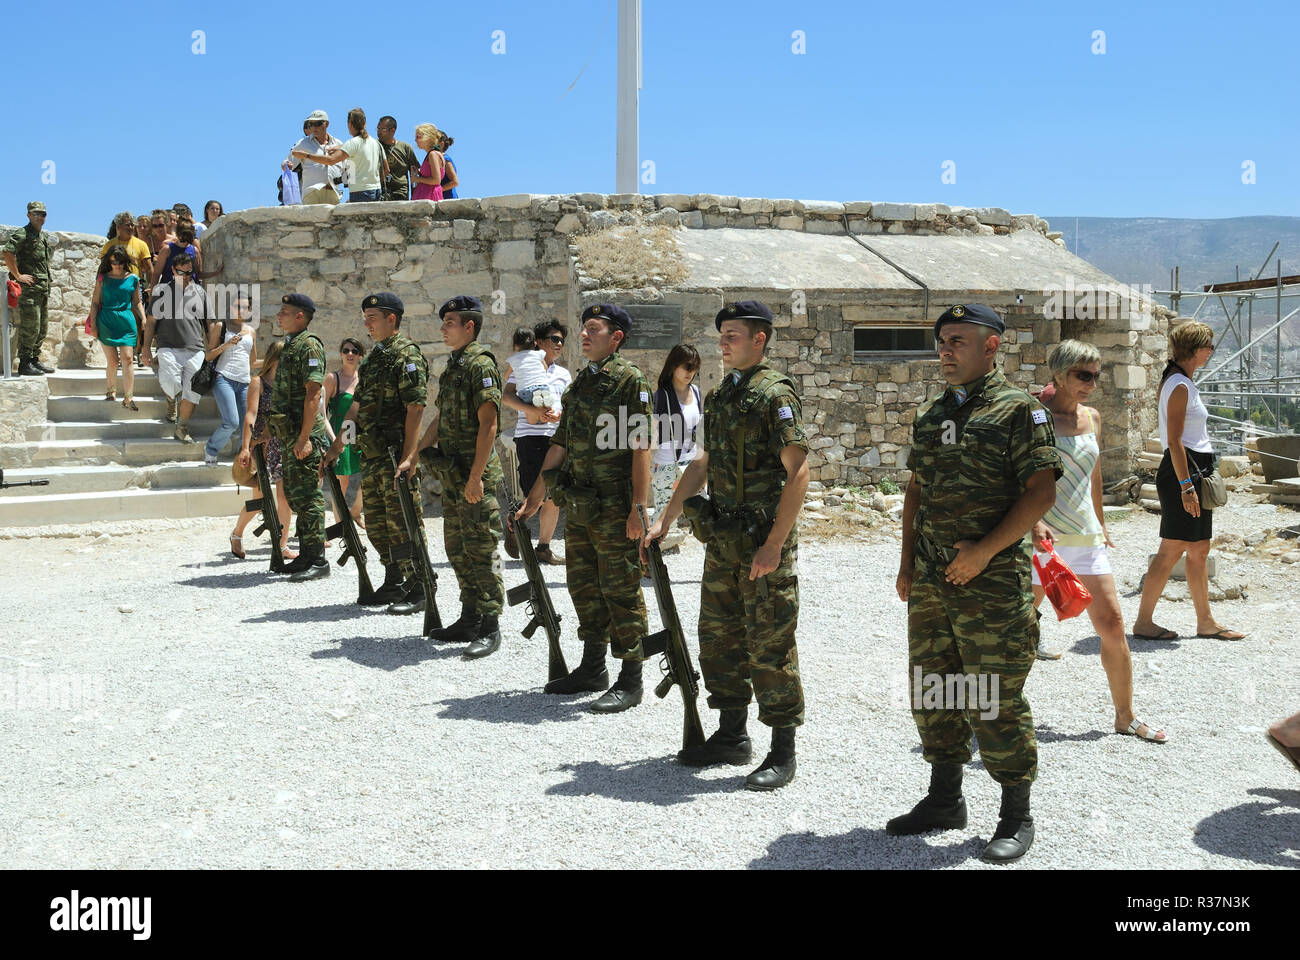 Athens, Greece, August 8: changing the guard at the flagpole with the Greek flag at the observation deck of the Acropolis of Athens August 8, 2013 in  Stock Photo